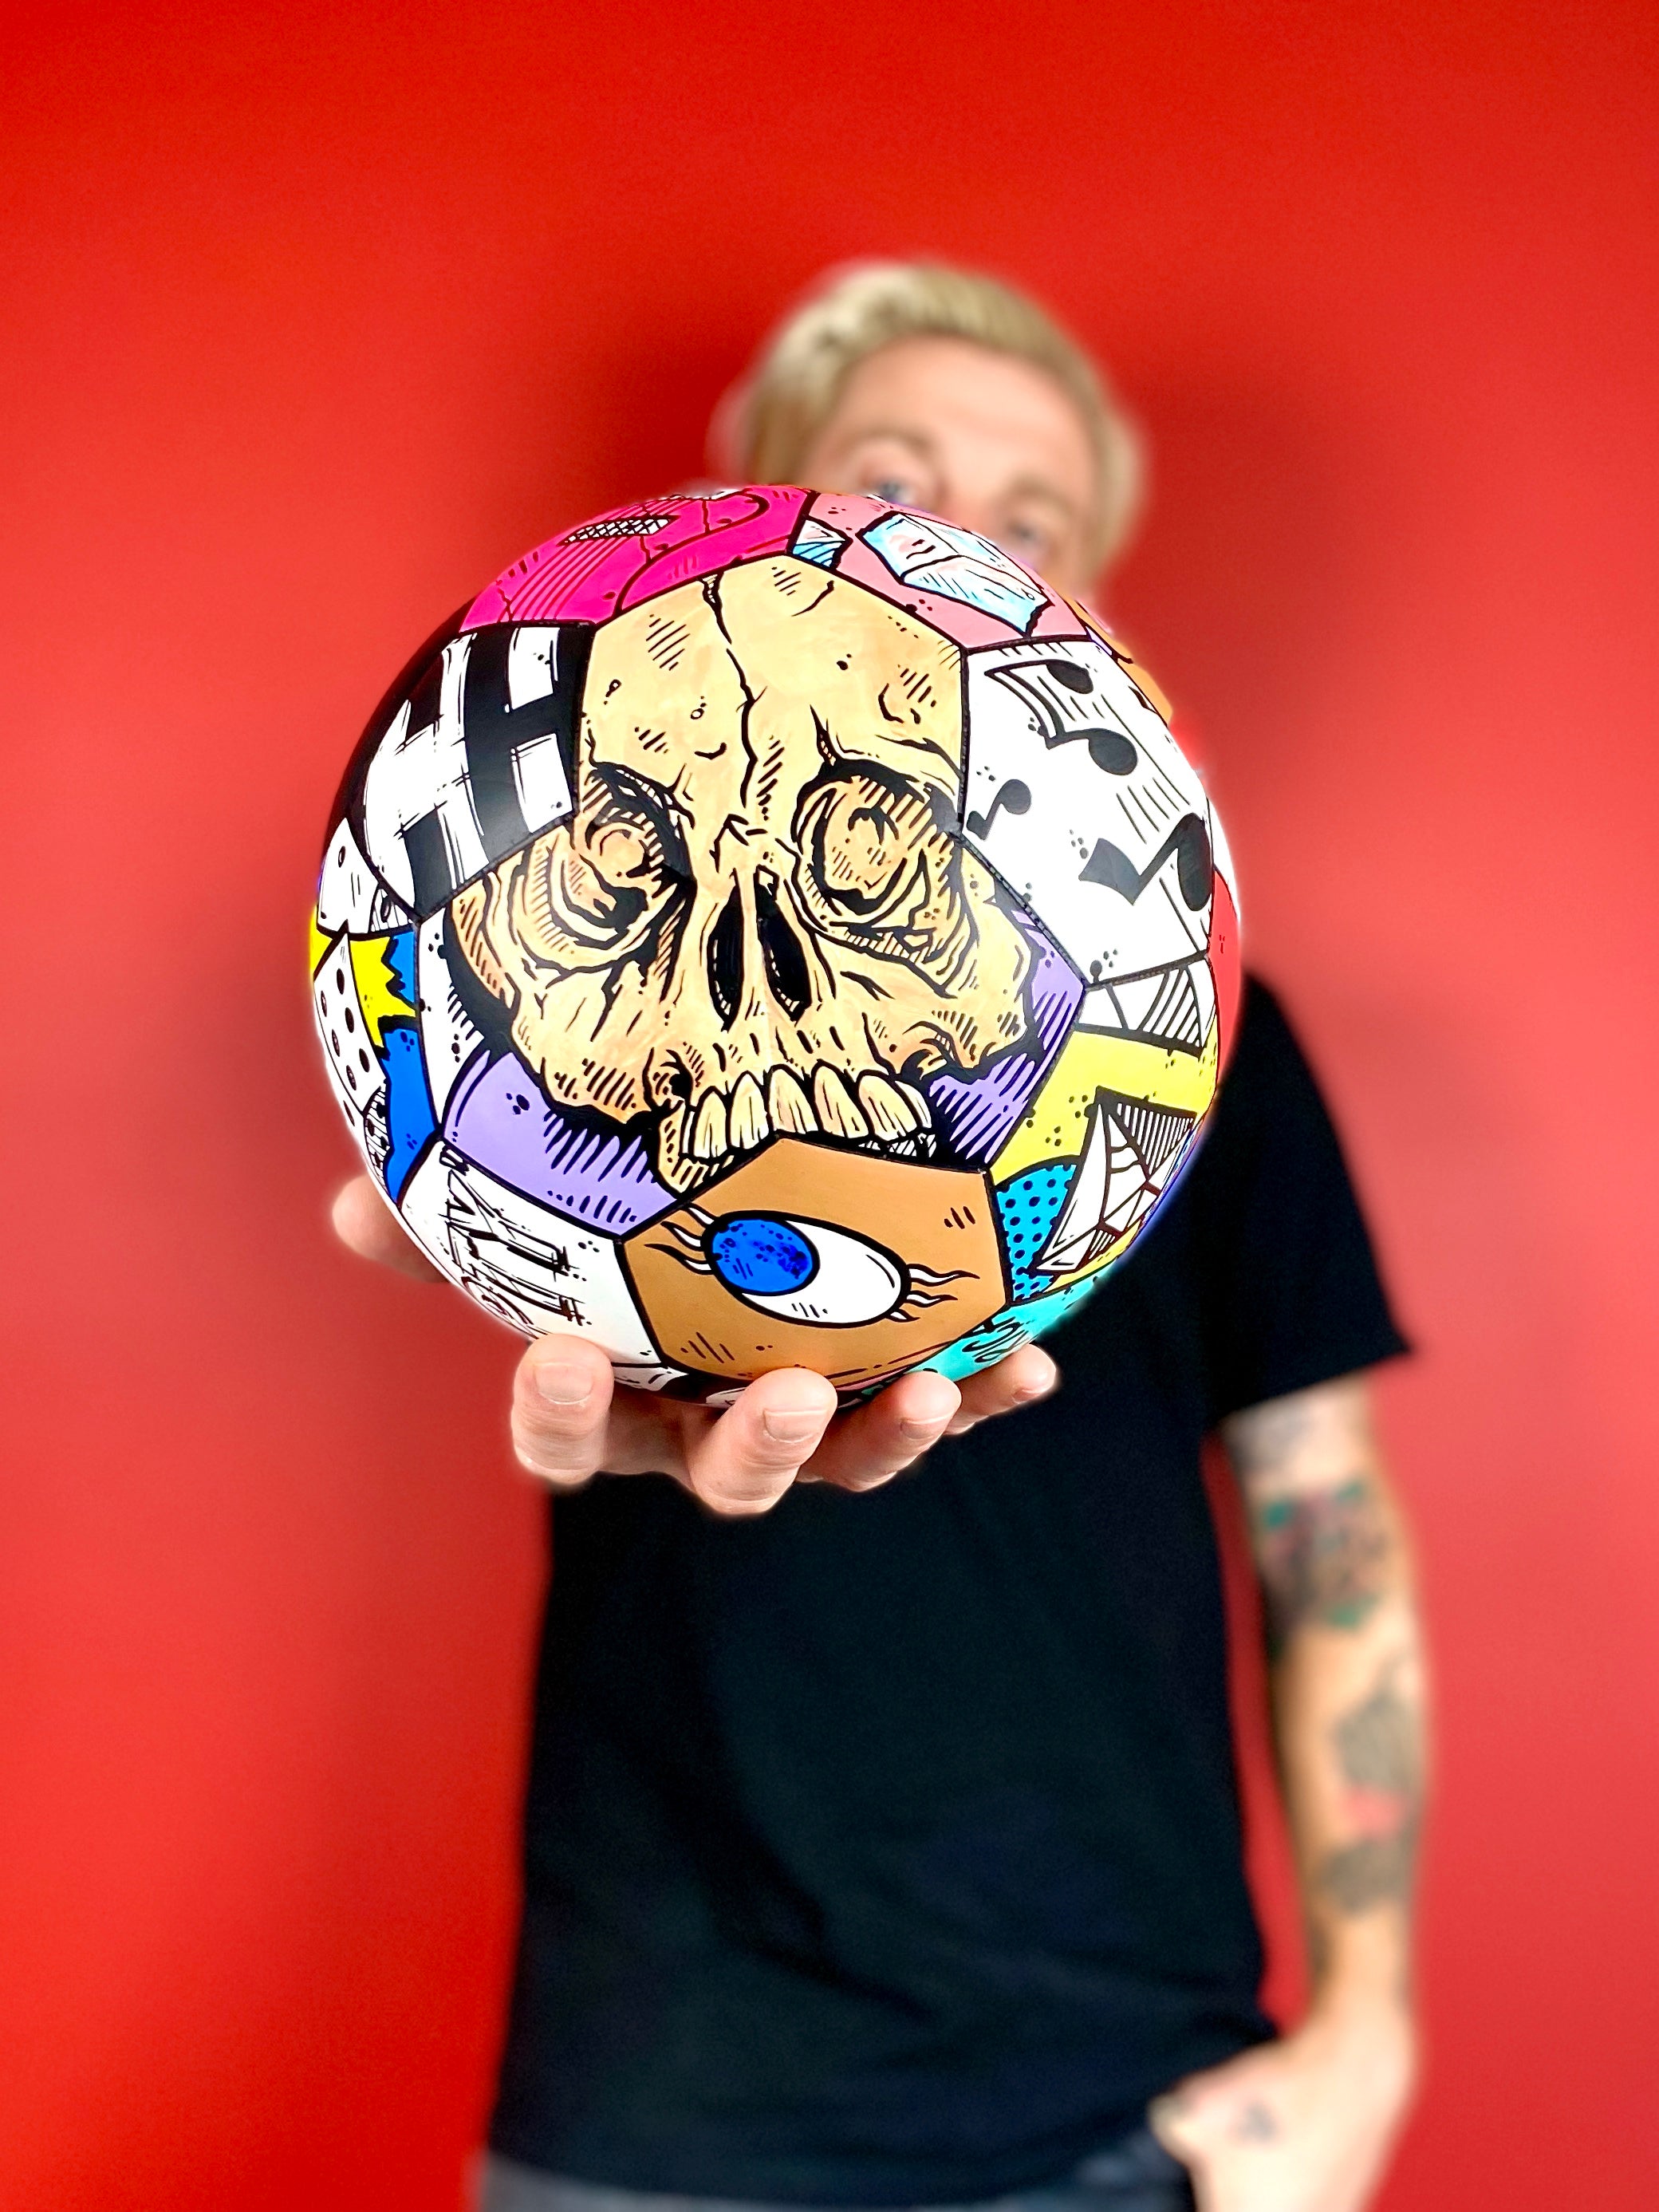 Sech 1 of 1 - Hand painted Soccerball - Football - Futball